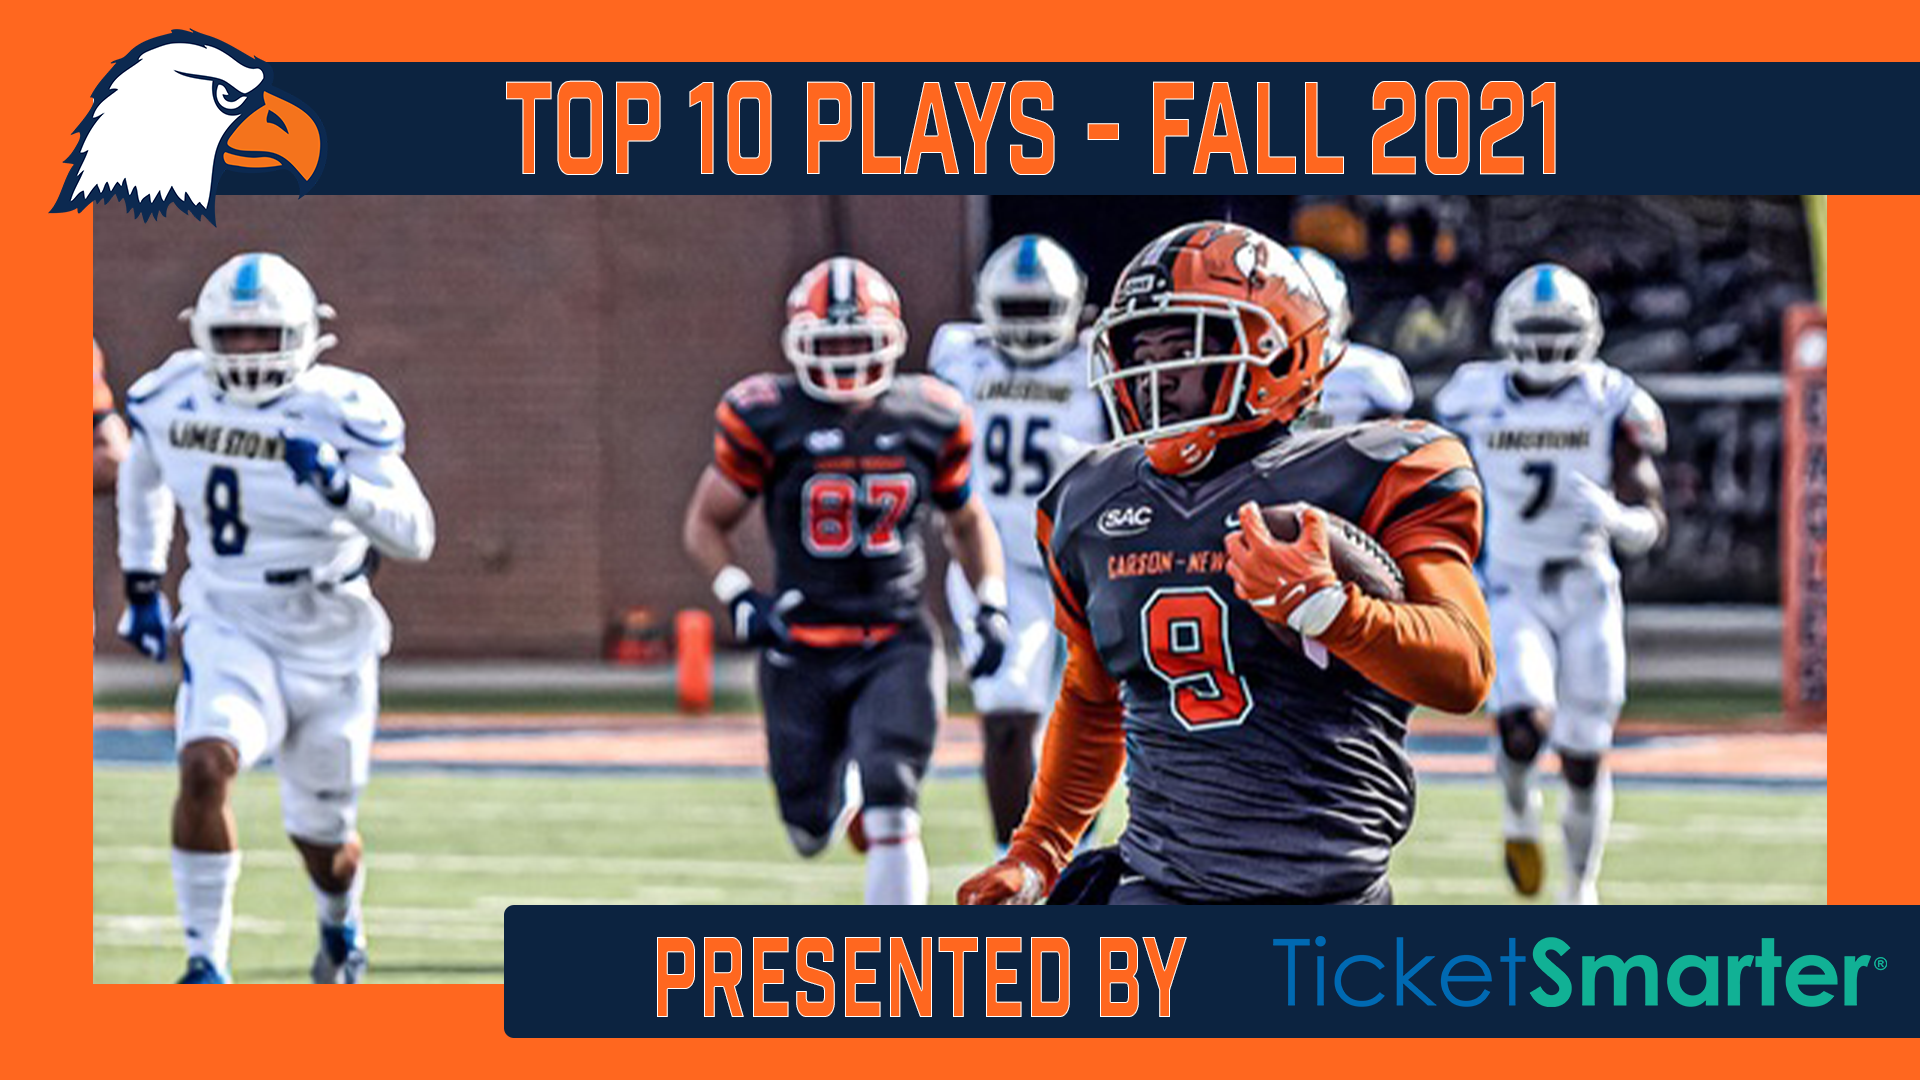 Eagle Sports Network releases top plays of fall 2021